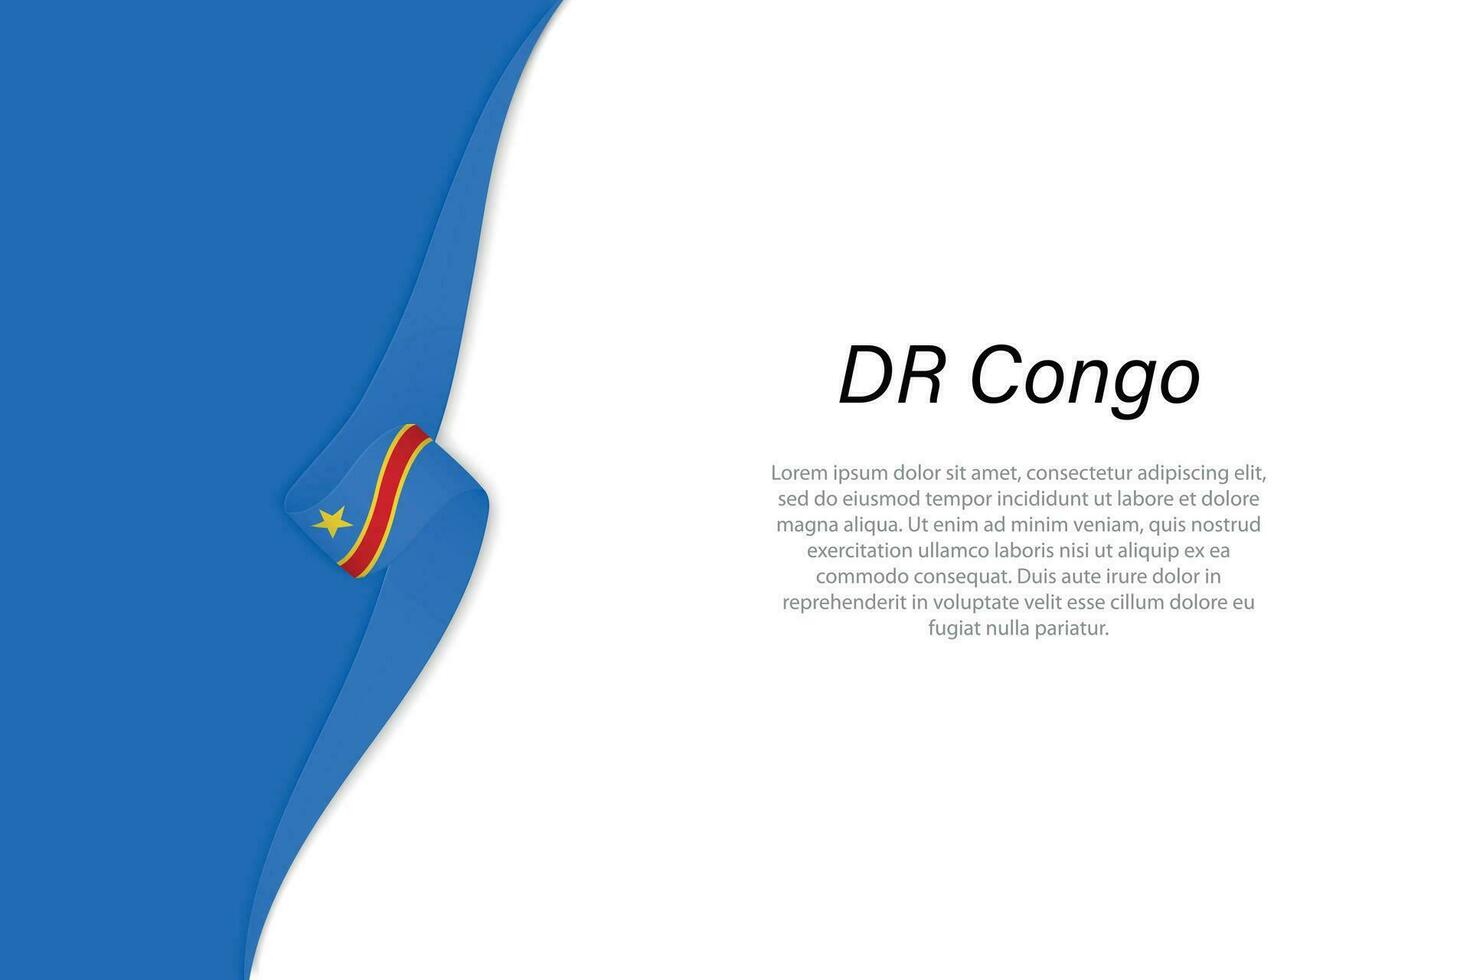 Wave flag of DR Congo with copyspace background vector